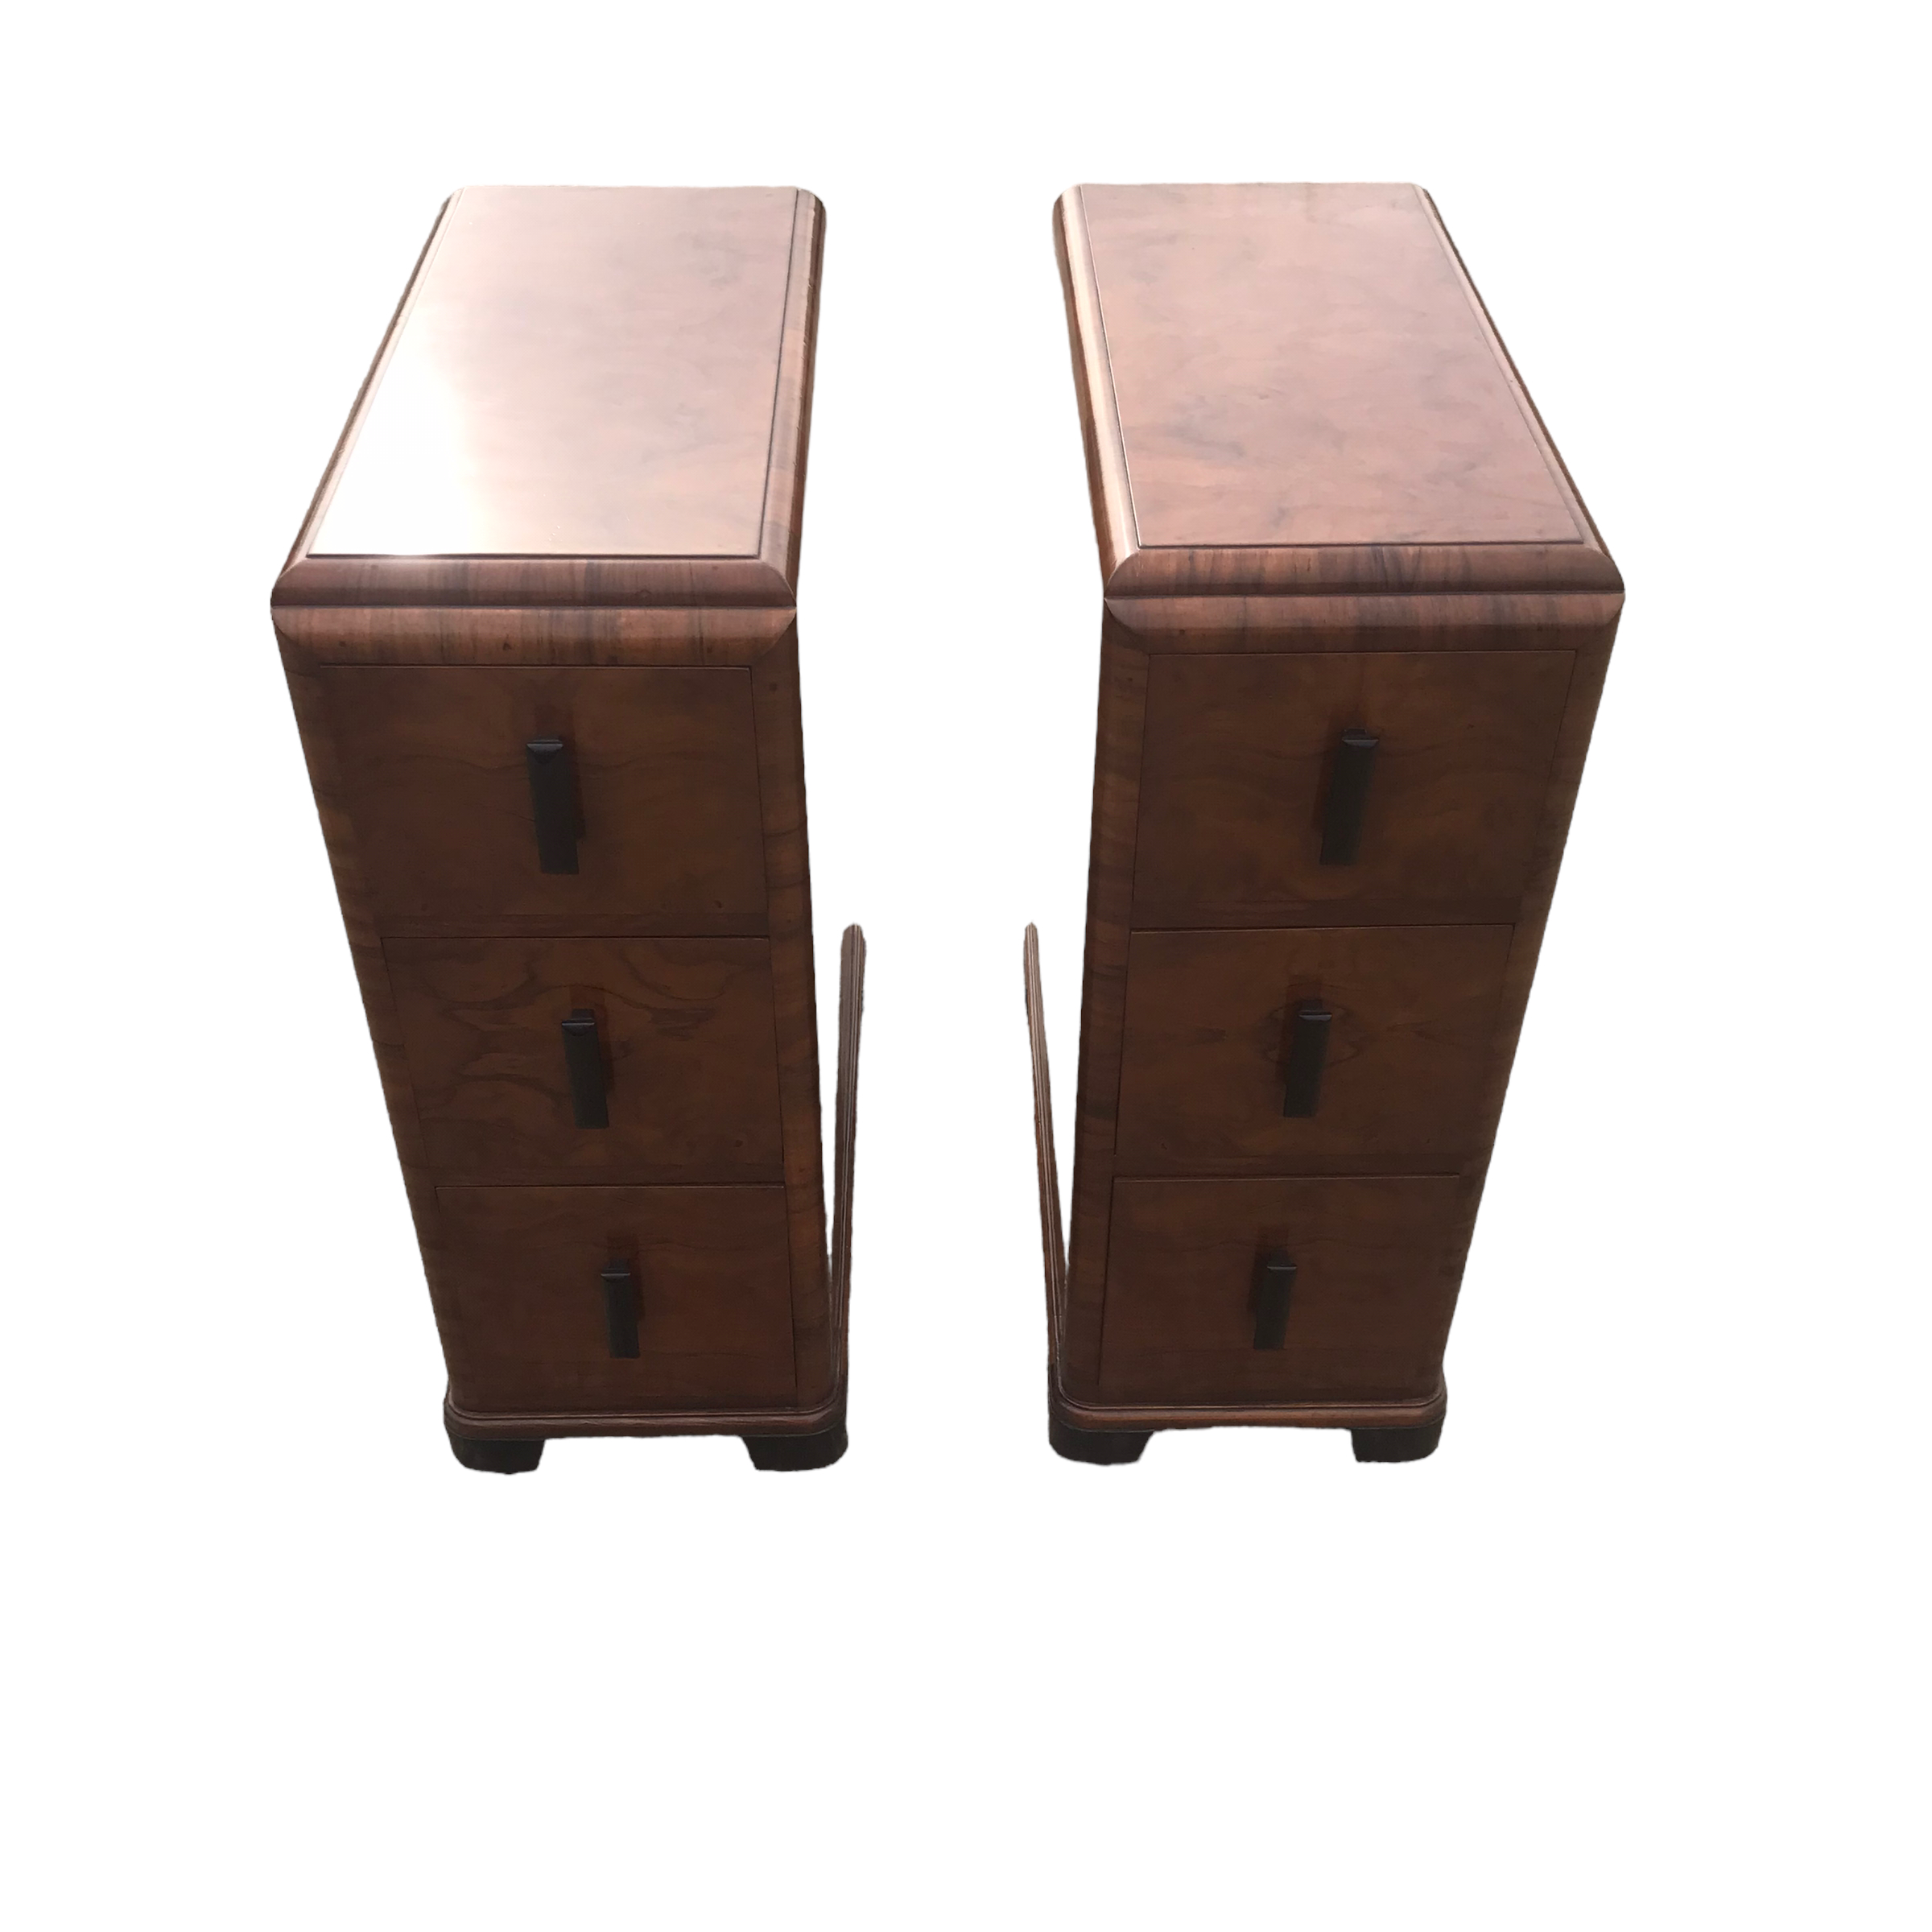 PAIR OF GOOD QUALITY ANTIQUE ART DECO WALNUT BEDSIDE CHESTS